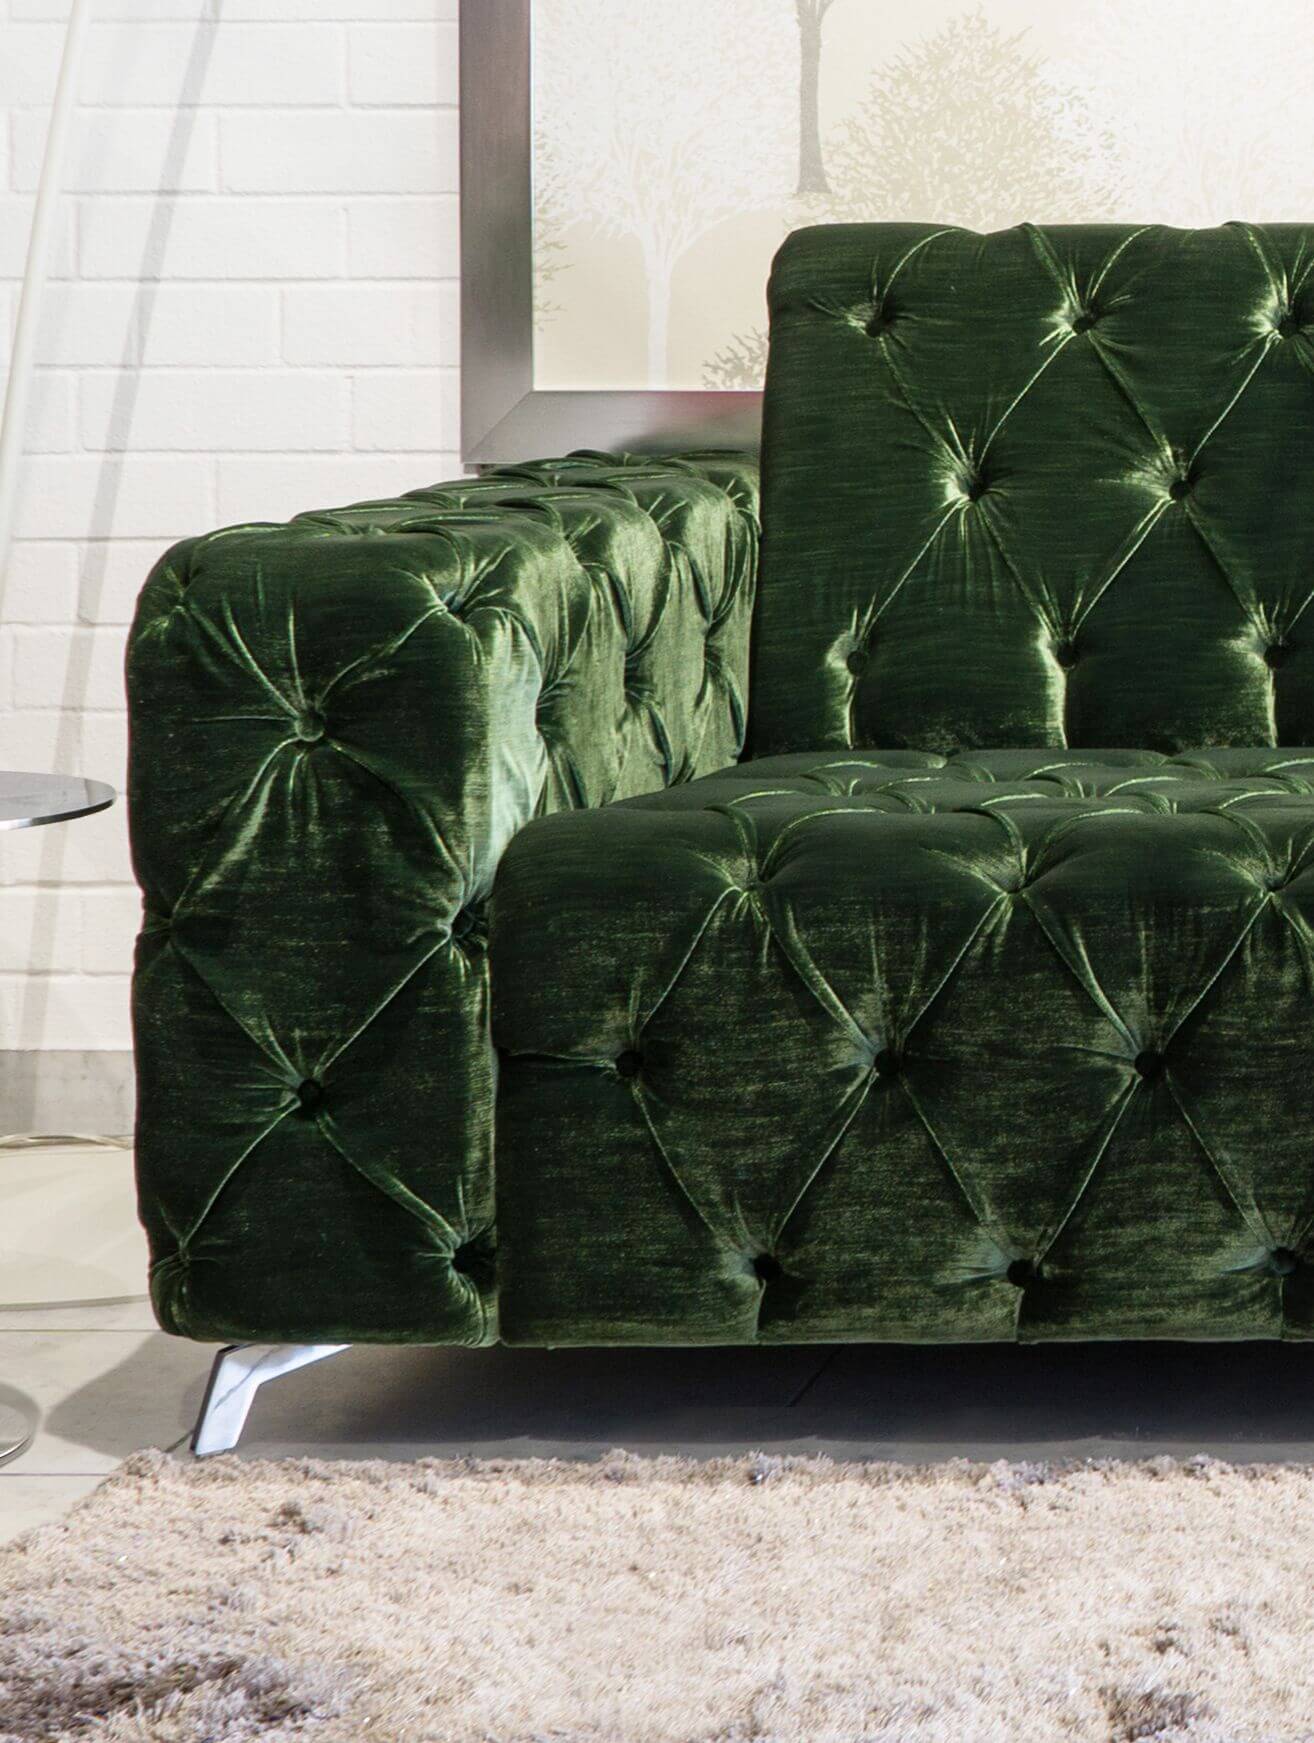 Classic Deluxe chesterfield bőr fotel